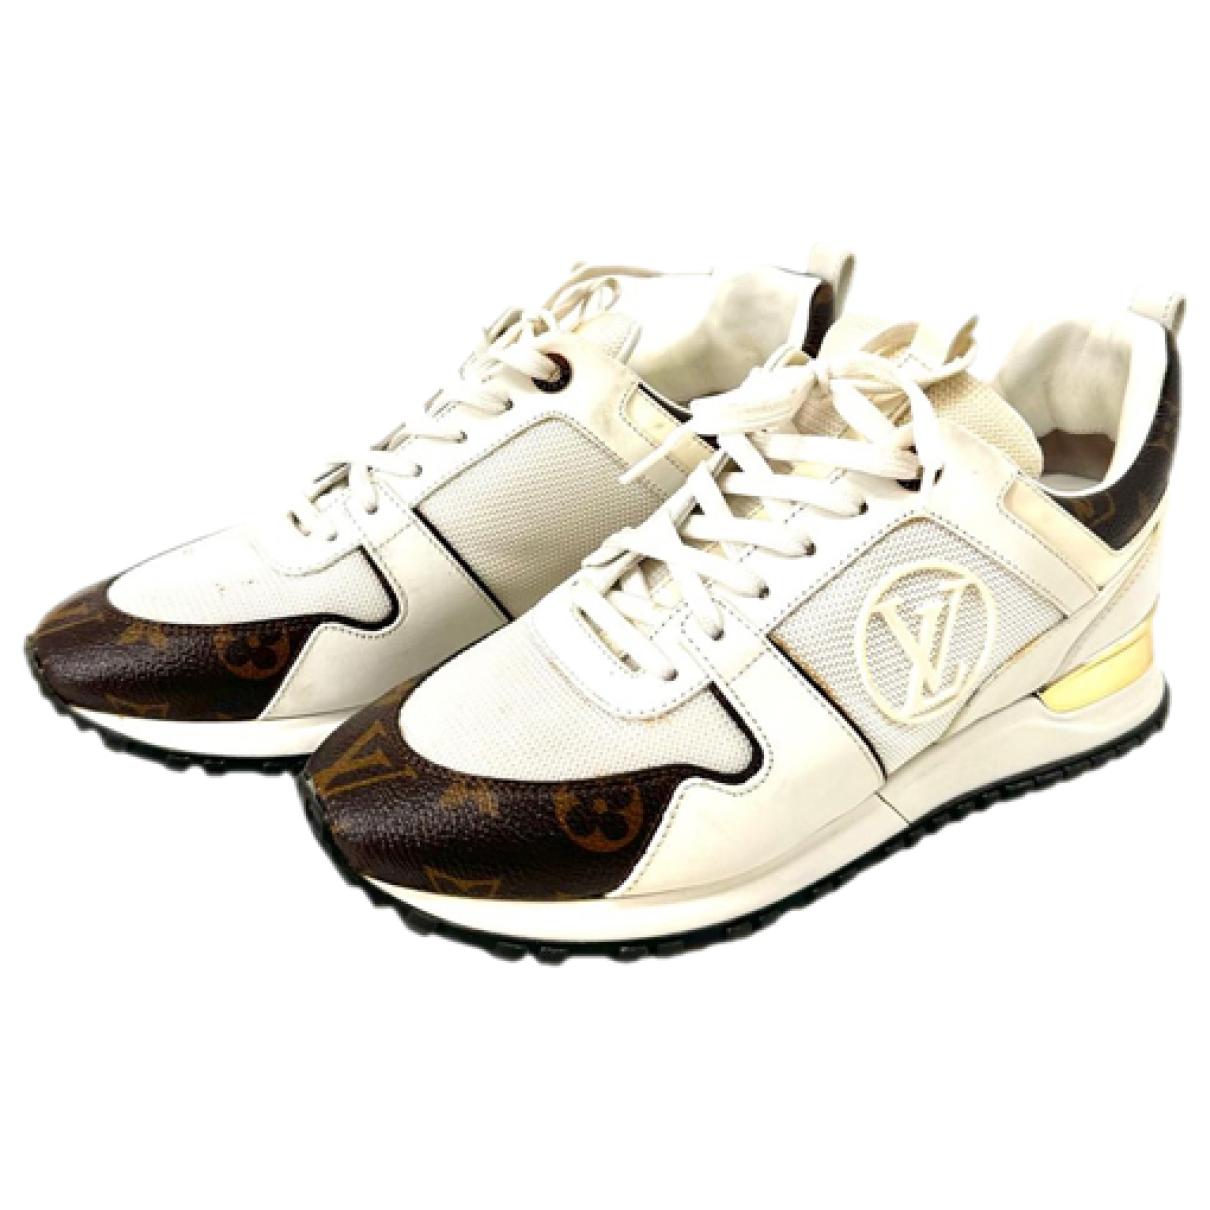 Run away leather trainers Louis Vuitton White size 39 EU in